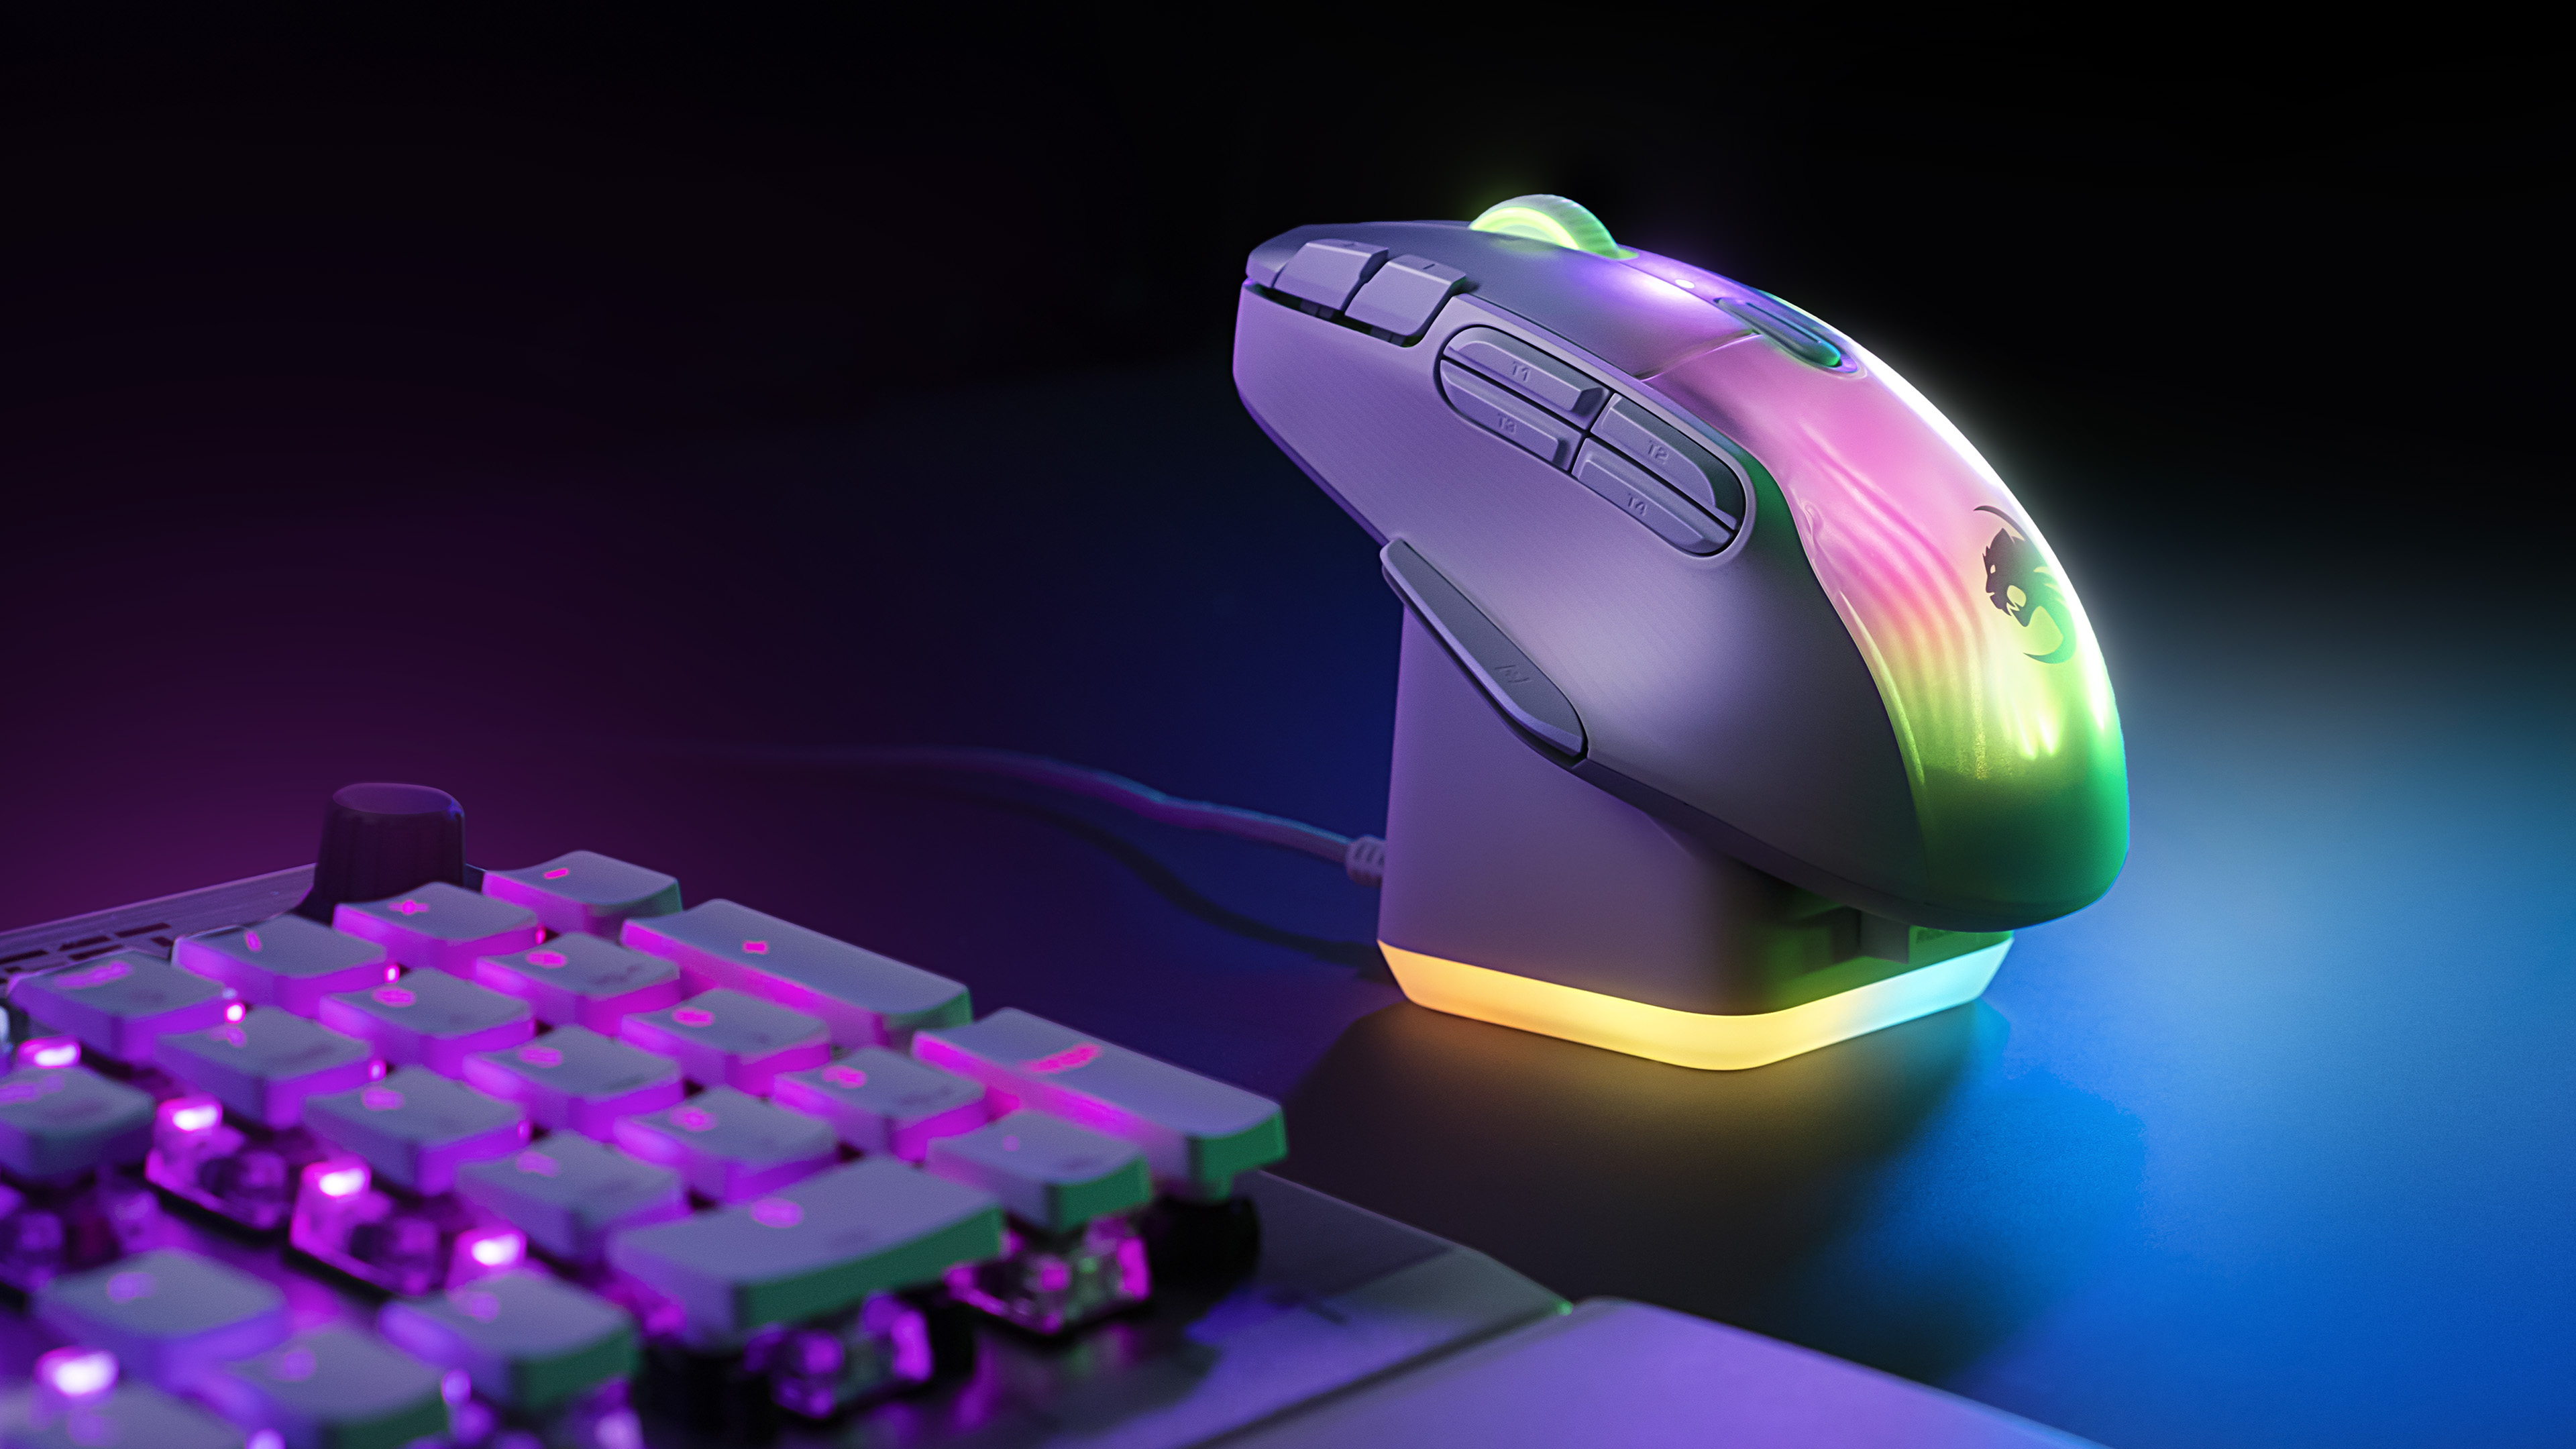 ROCCAT's Iconic Kone XP Mouse Meets Stellar Wireless Tech in the All-New Kone  XP Air Wireless Customizable RGB Gaming Mouse